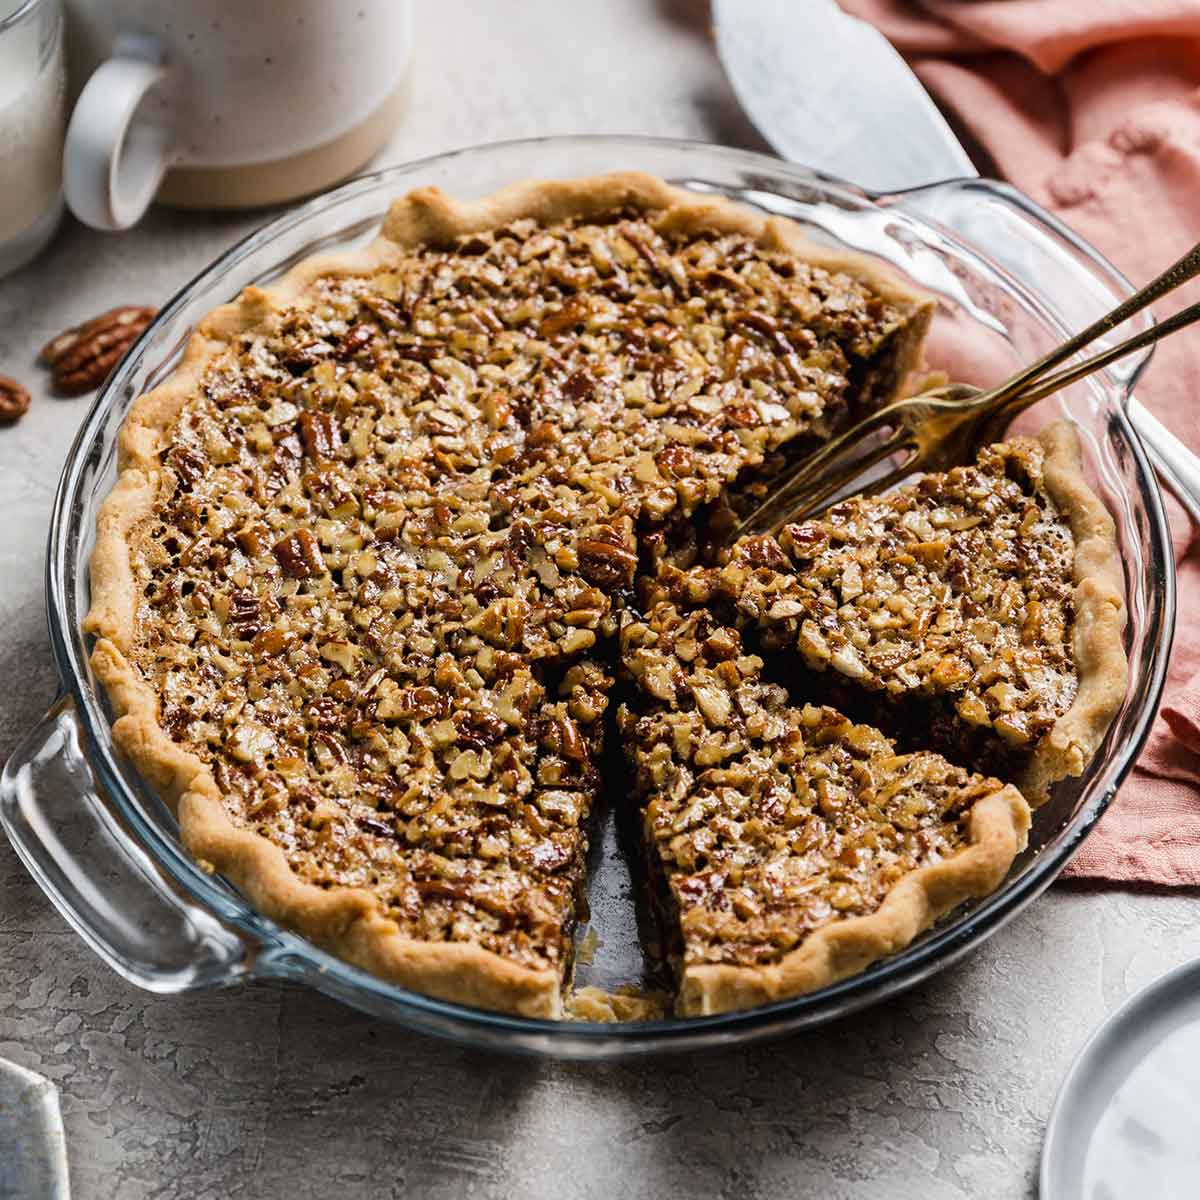 Pecan pie in glass pie dish with two slices cut away and fork in dish.